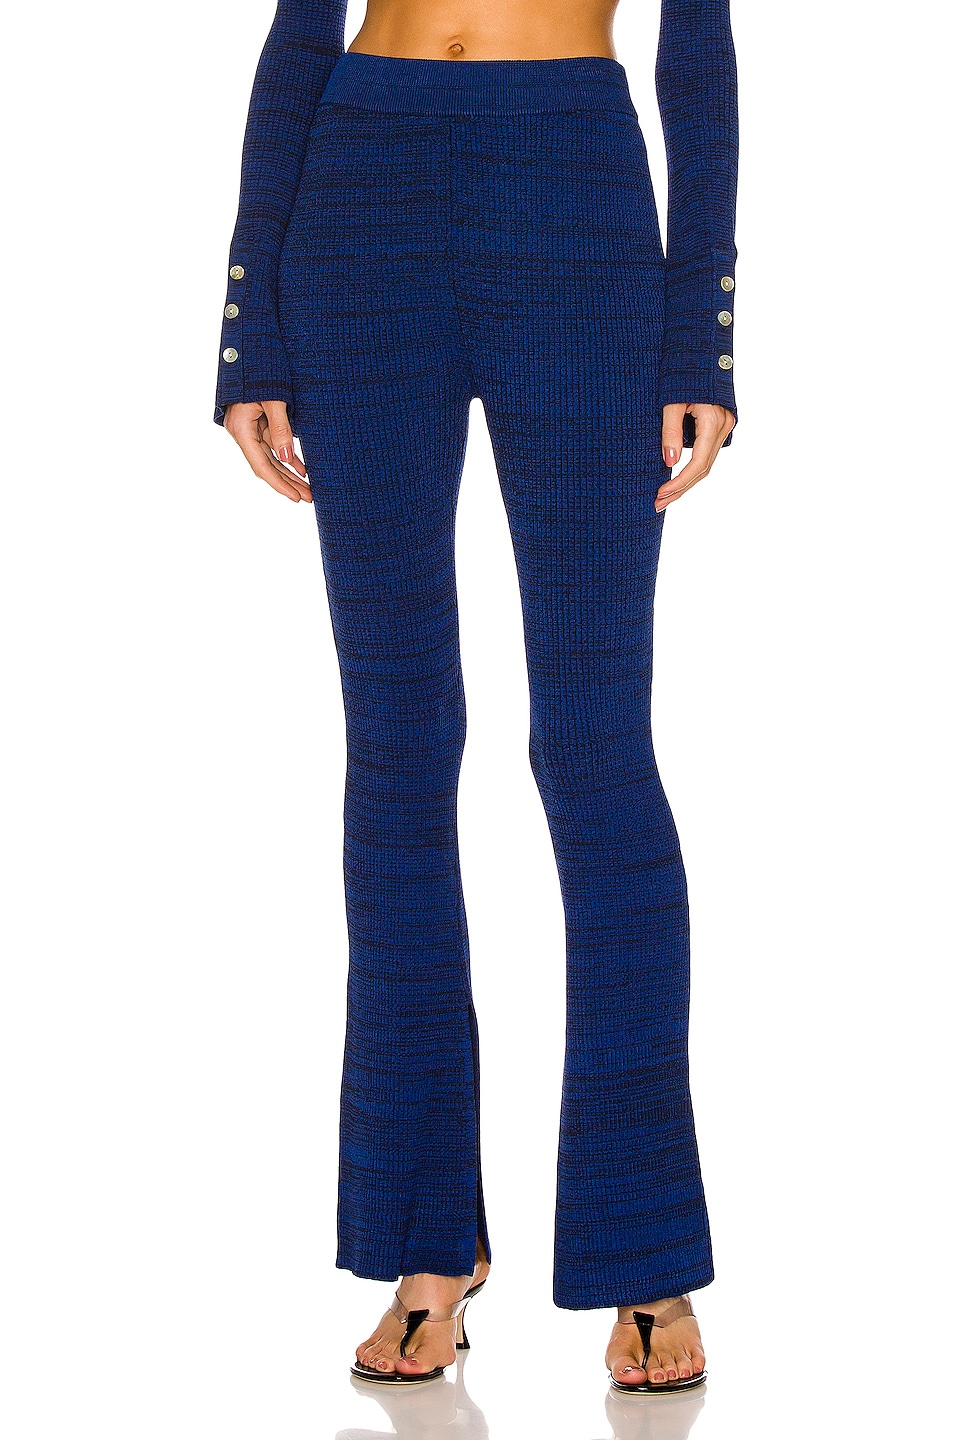 Image 1 of Le Ore Rimini Pant in Surf Blue & Naval Academy Marl